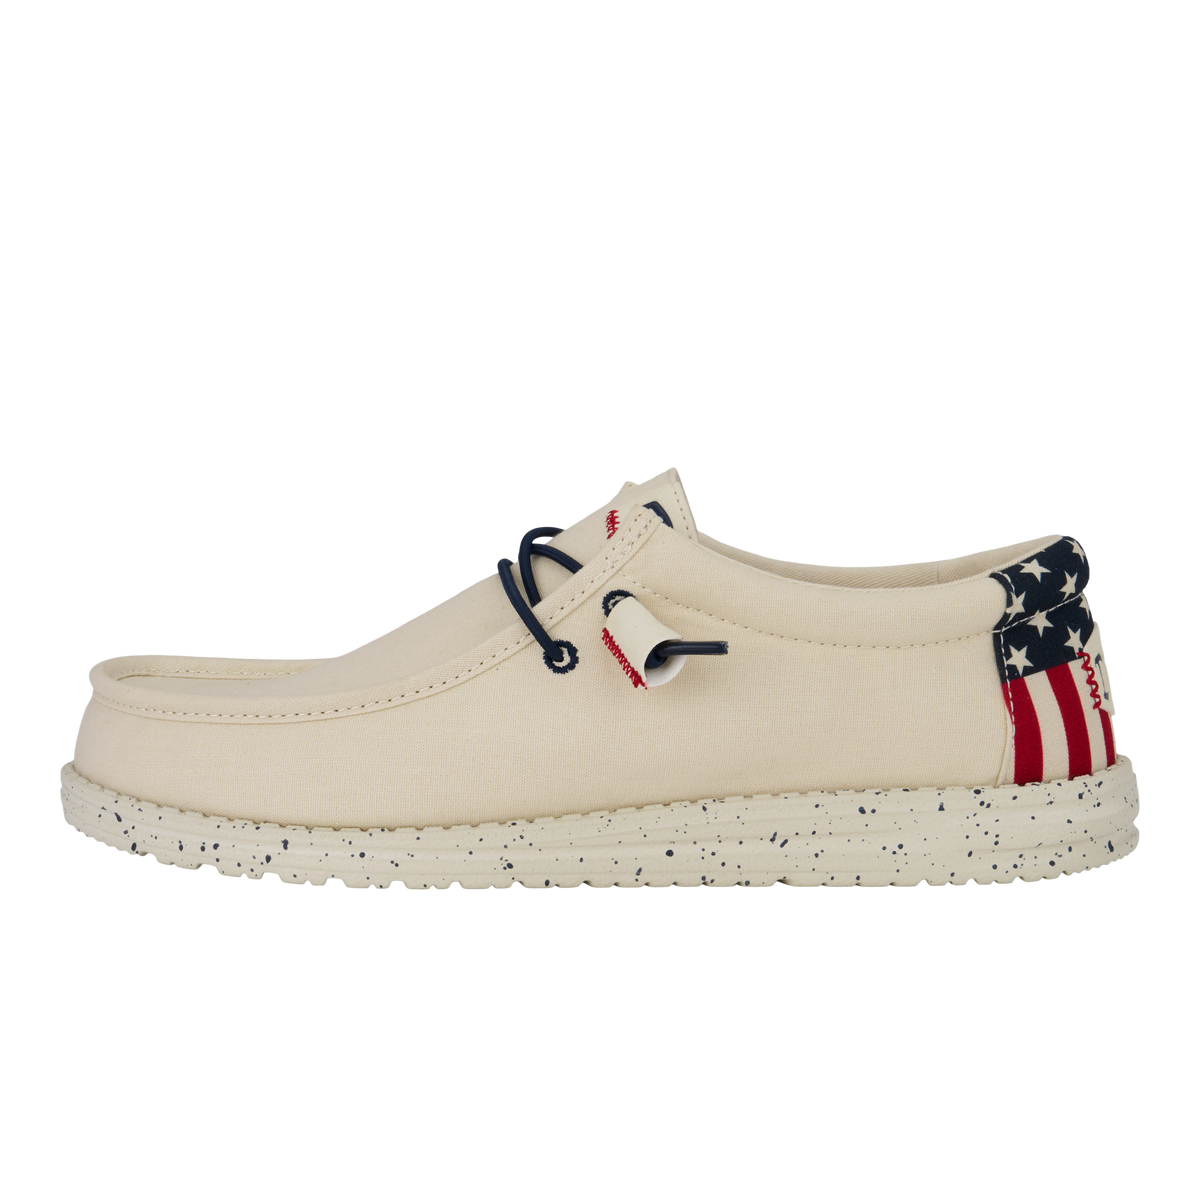 HEY DUDE Wally Patriotic Mens Shoes - OFF WHITE